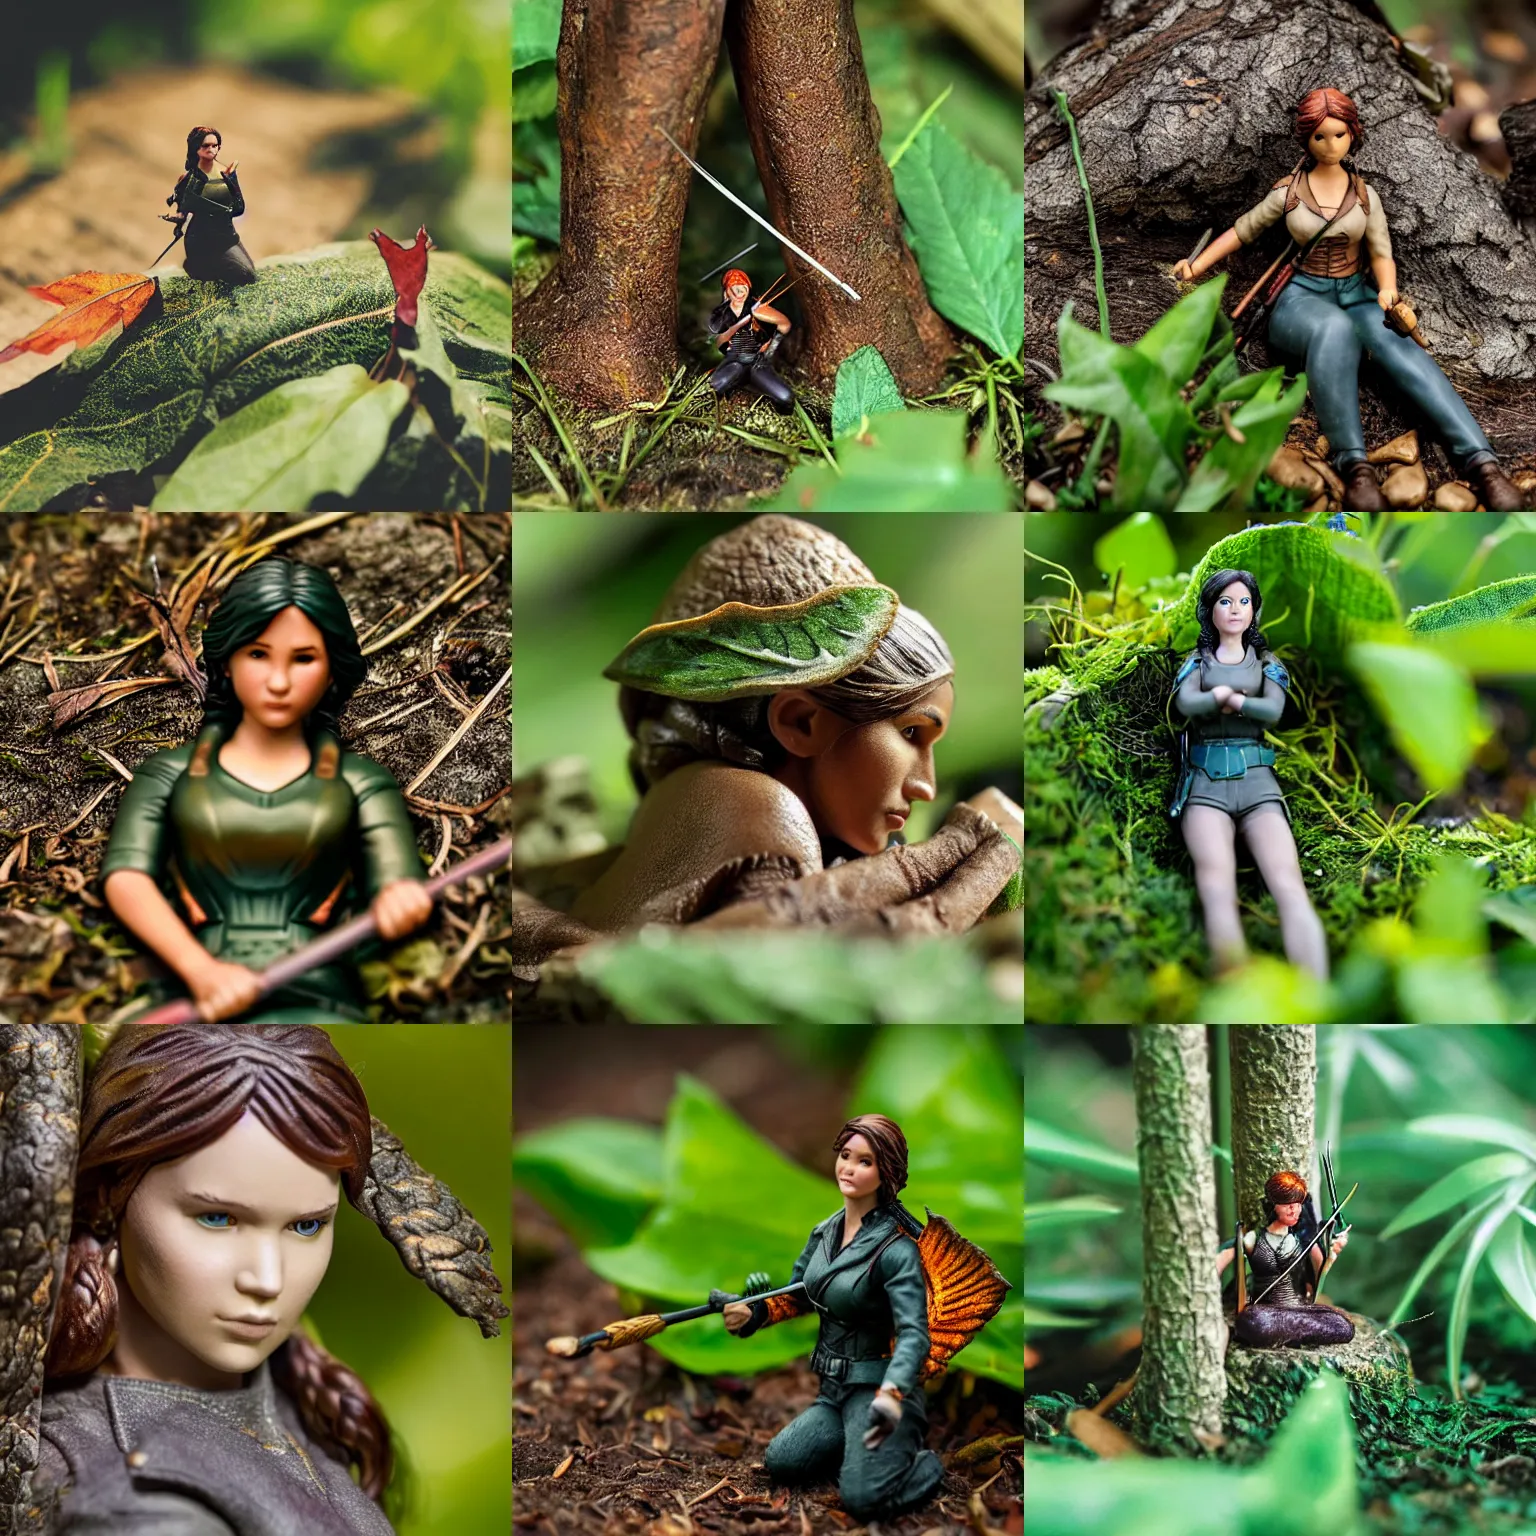 Prompt: Realistic miniature figure of Katniss Everdeen, accurate proportions, sheltering under a leaf in the garden, macro photography